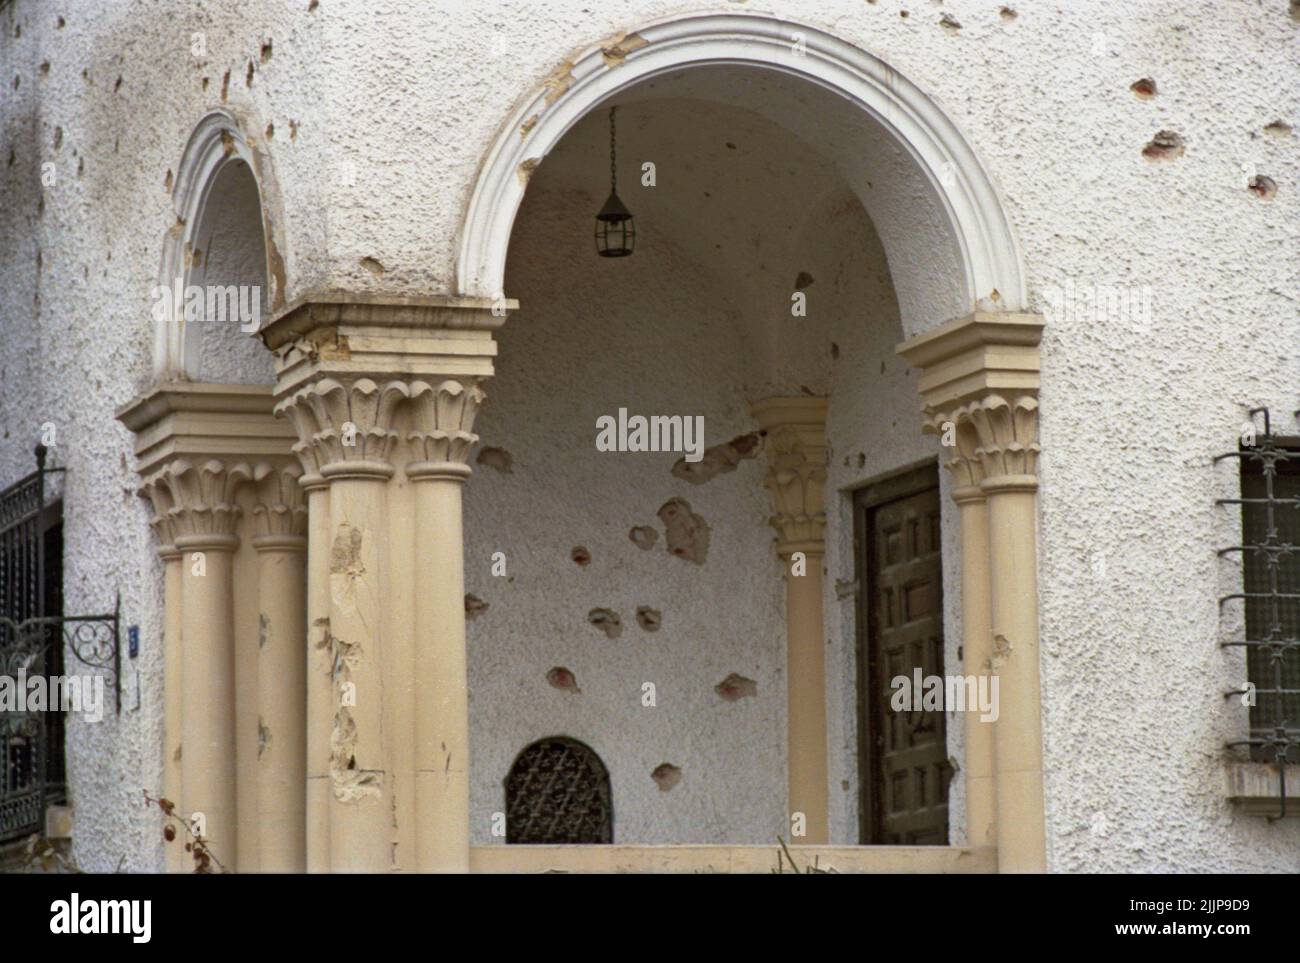 Bucharest, Romania, January 1990. The residence of the British ambassador (near the headquarters of the public Romanian television station), deteriorated by the gunfire during the anticommunist revolution of December 1989. Stock Photo